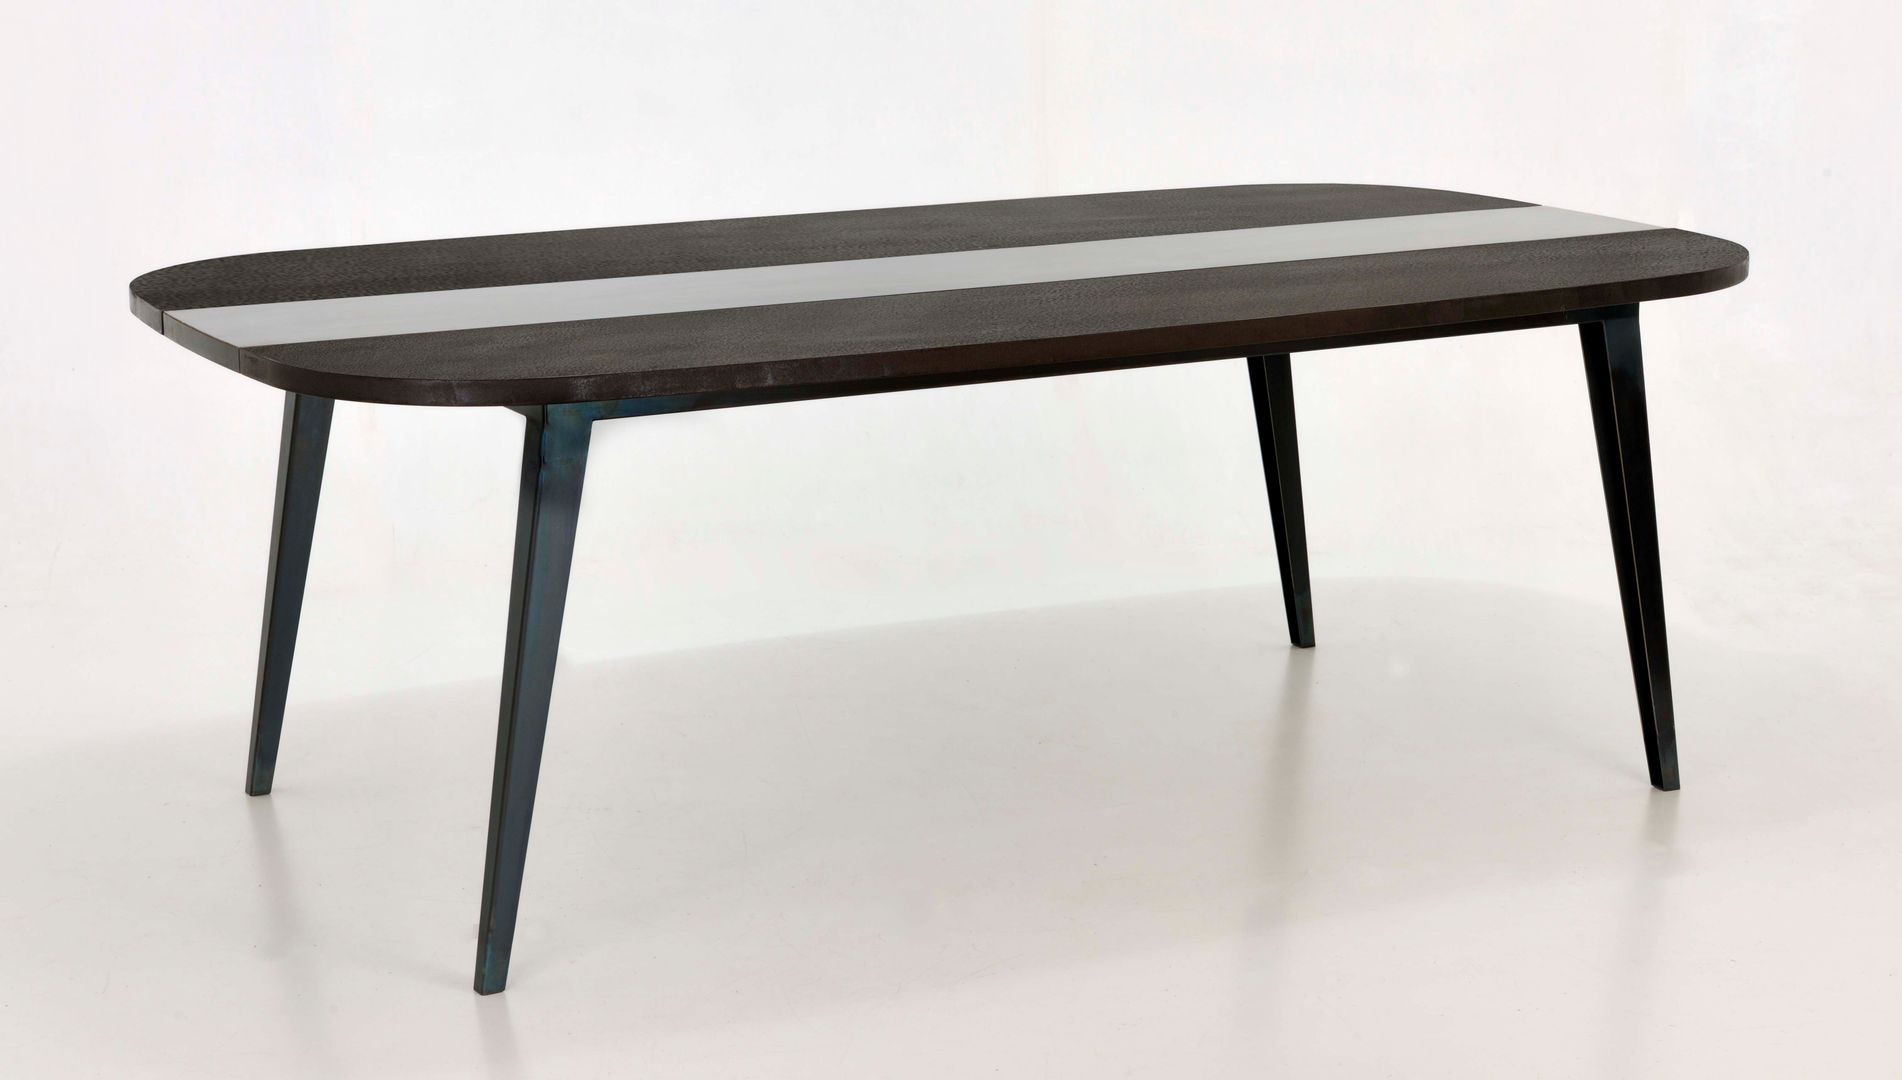 Table M, ATELIER MARTIN BERGER ATELIER MARTIN BERGER Other spaces Pet accessories